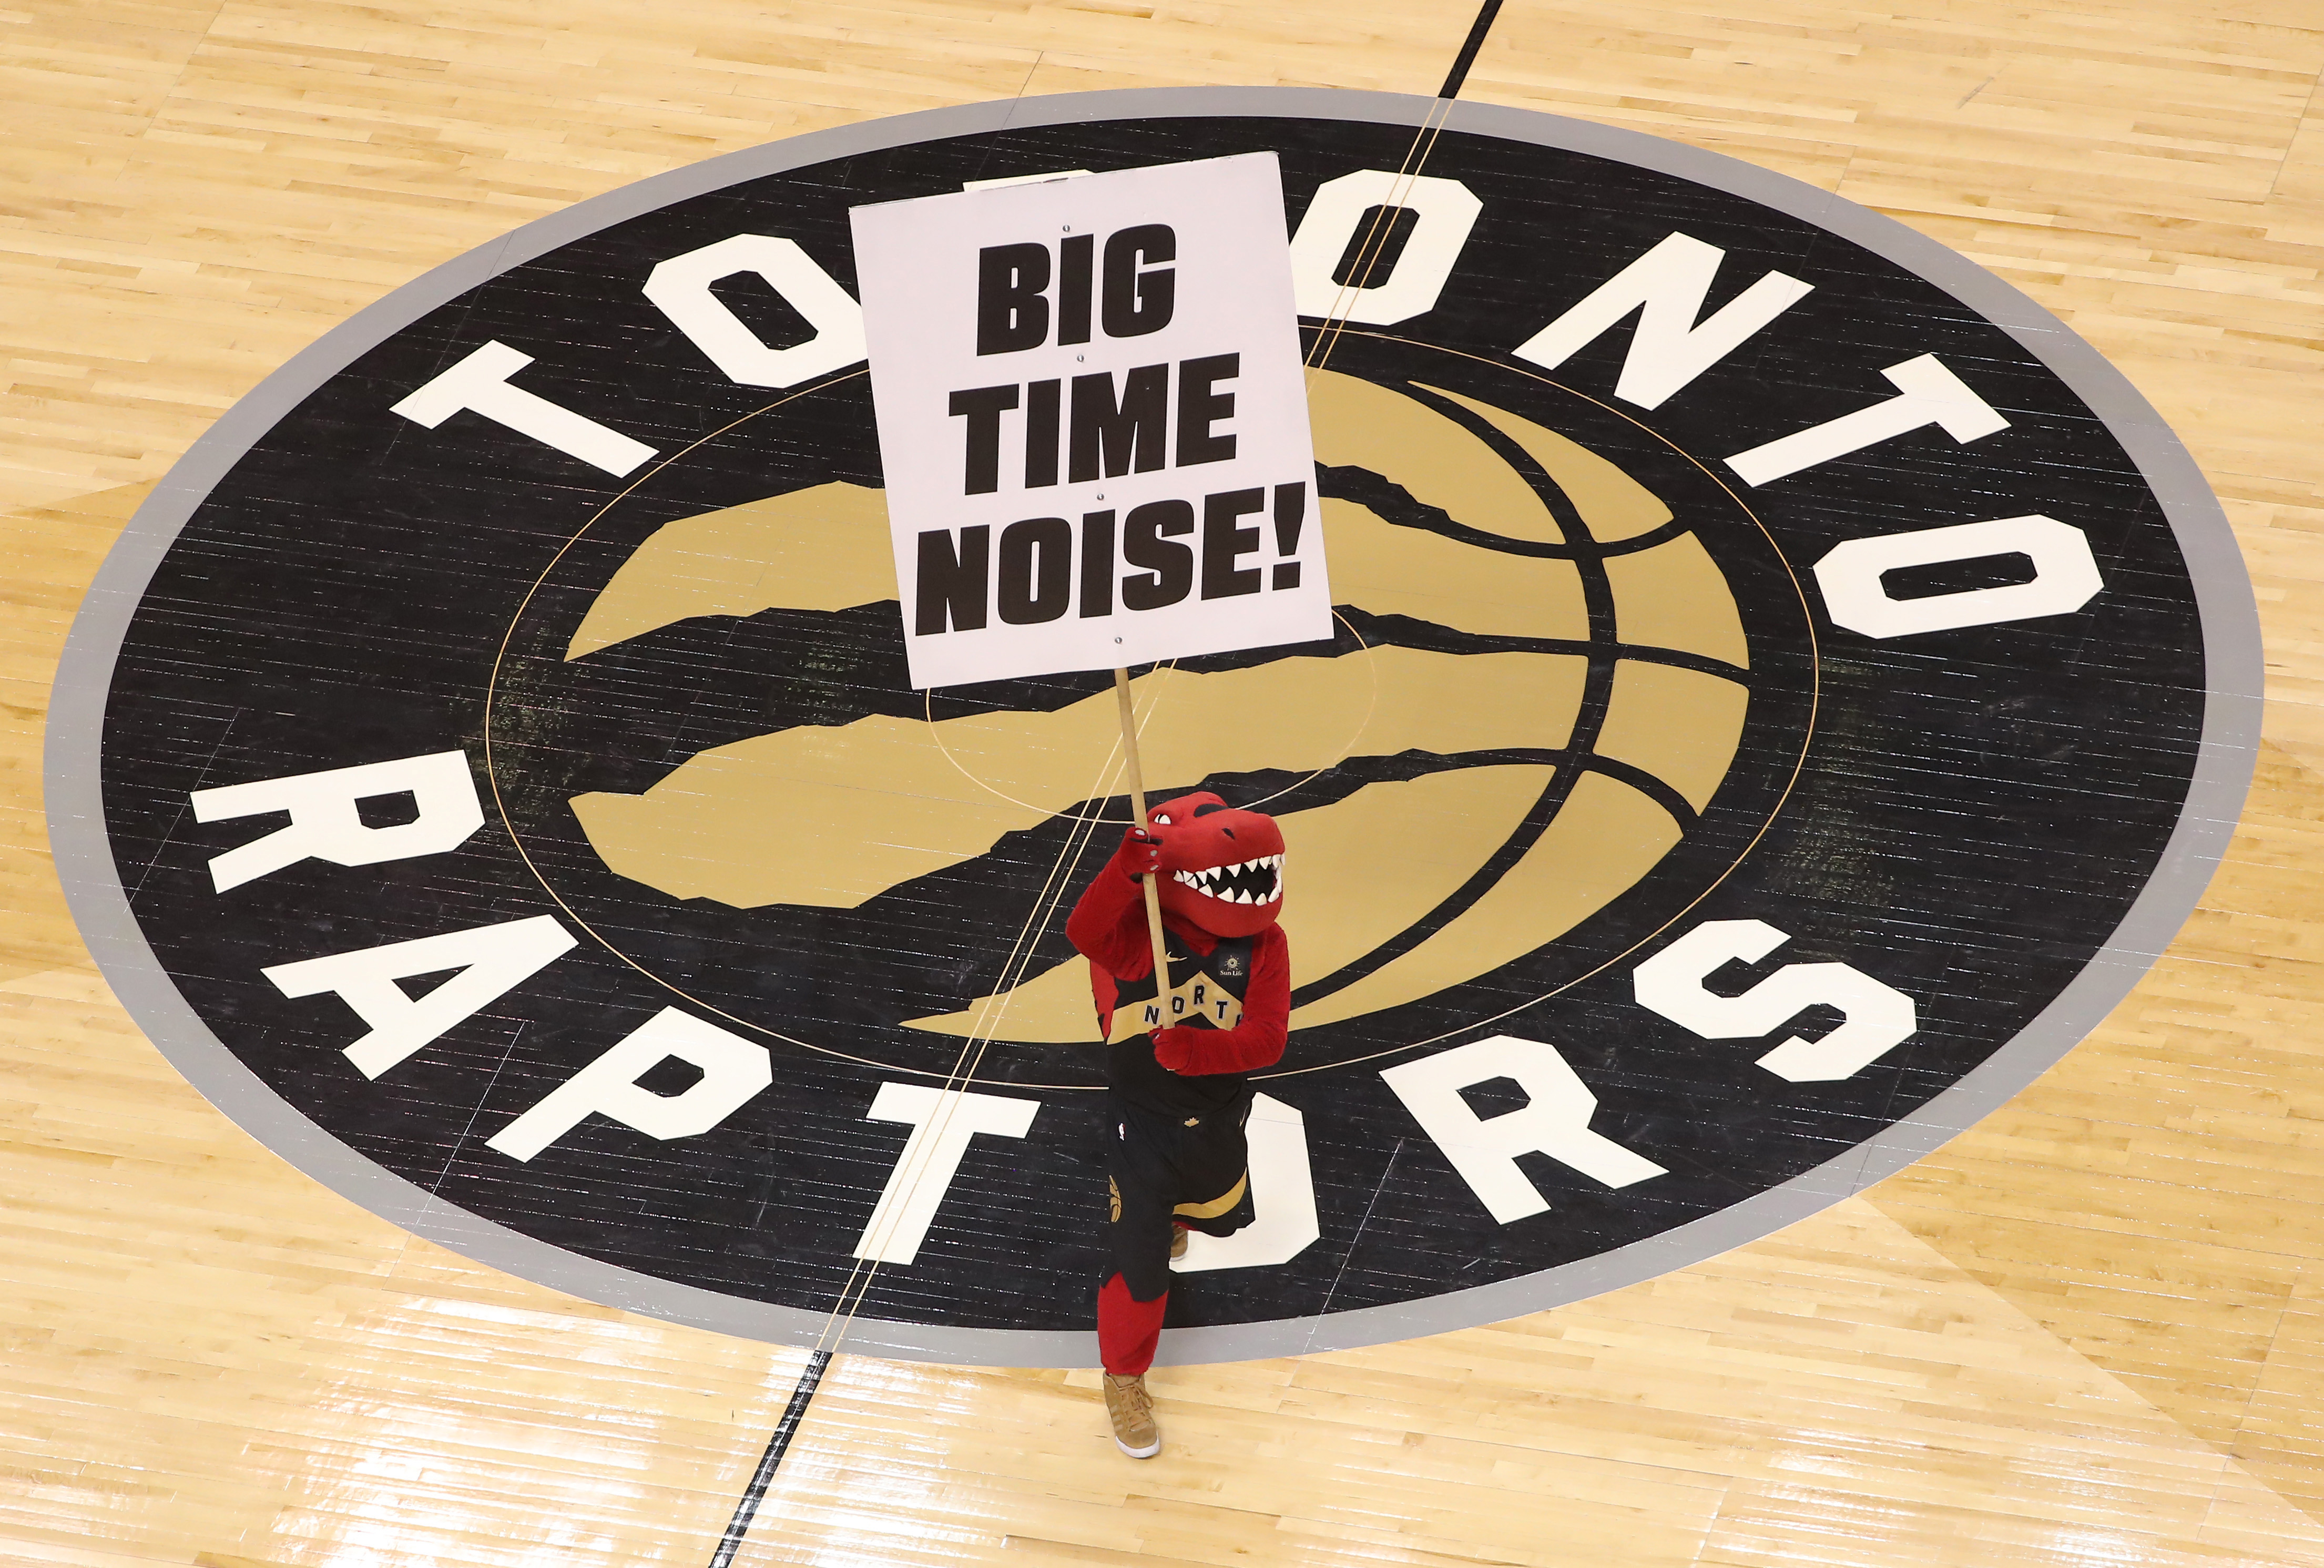 PHOTOS: Raptors unveil new uniforms with help from Drake 